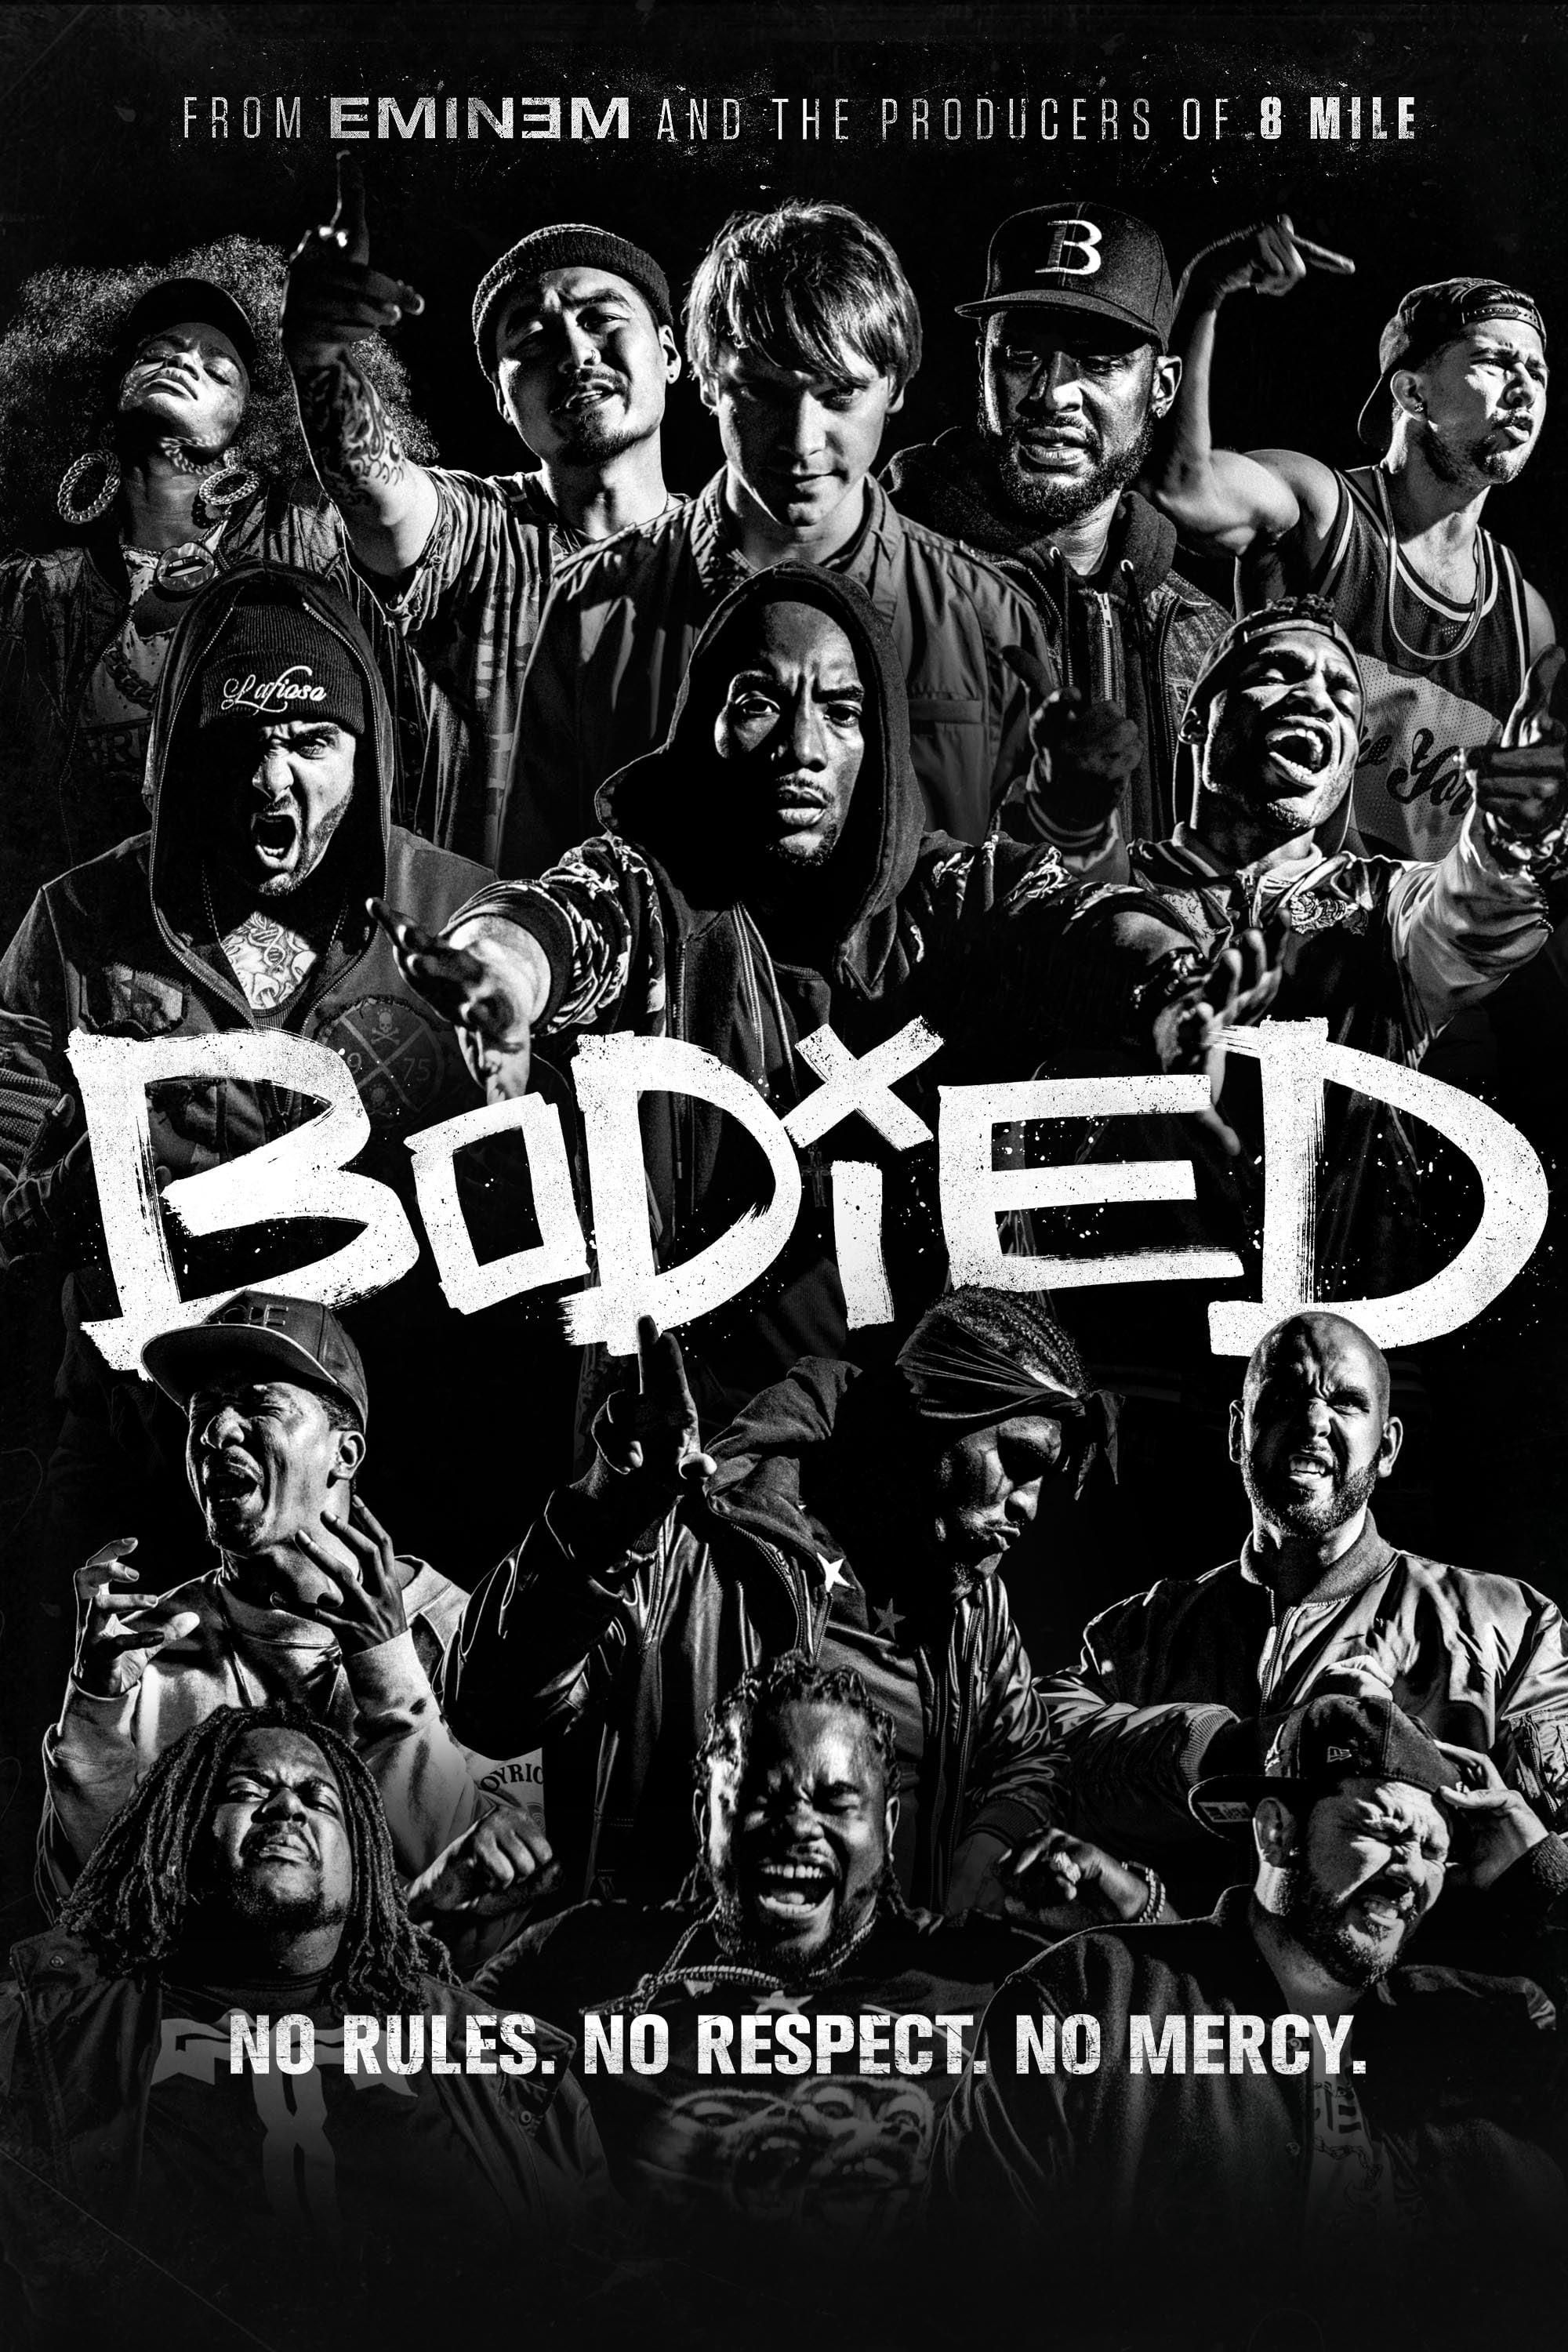 Bodied poster